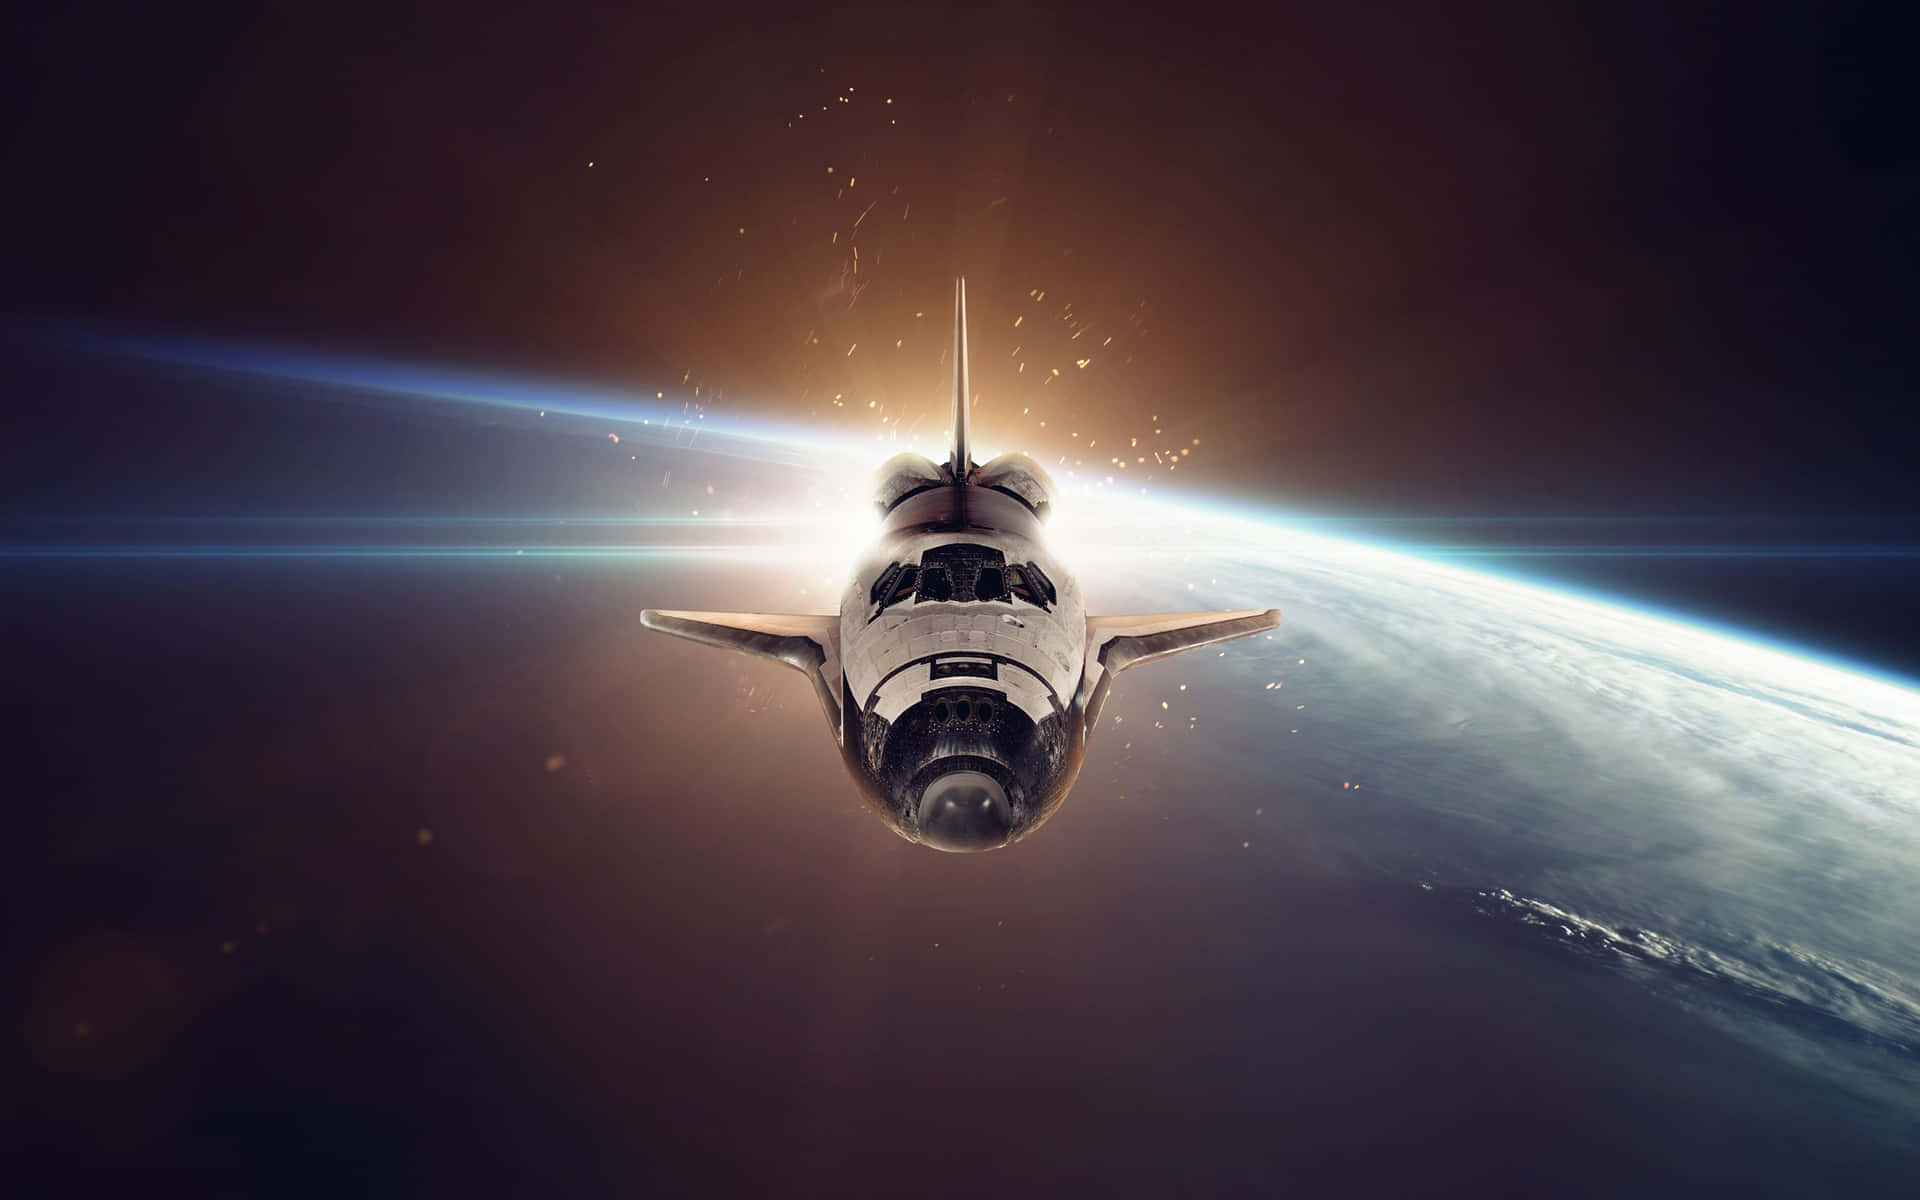 Capturing the beauty of the space shuttle Wallpaper